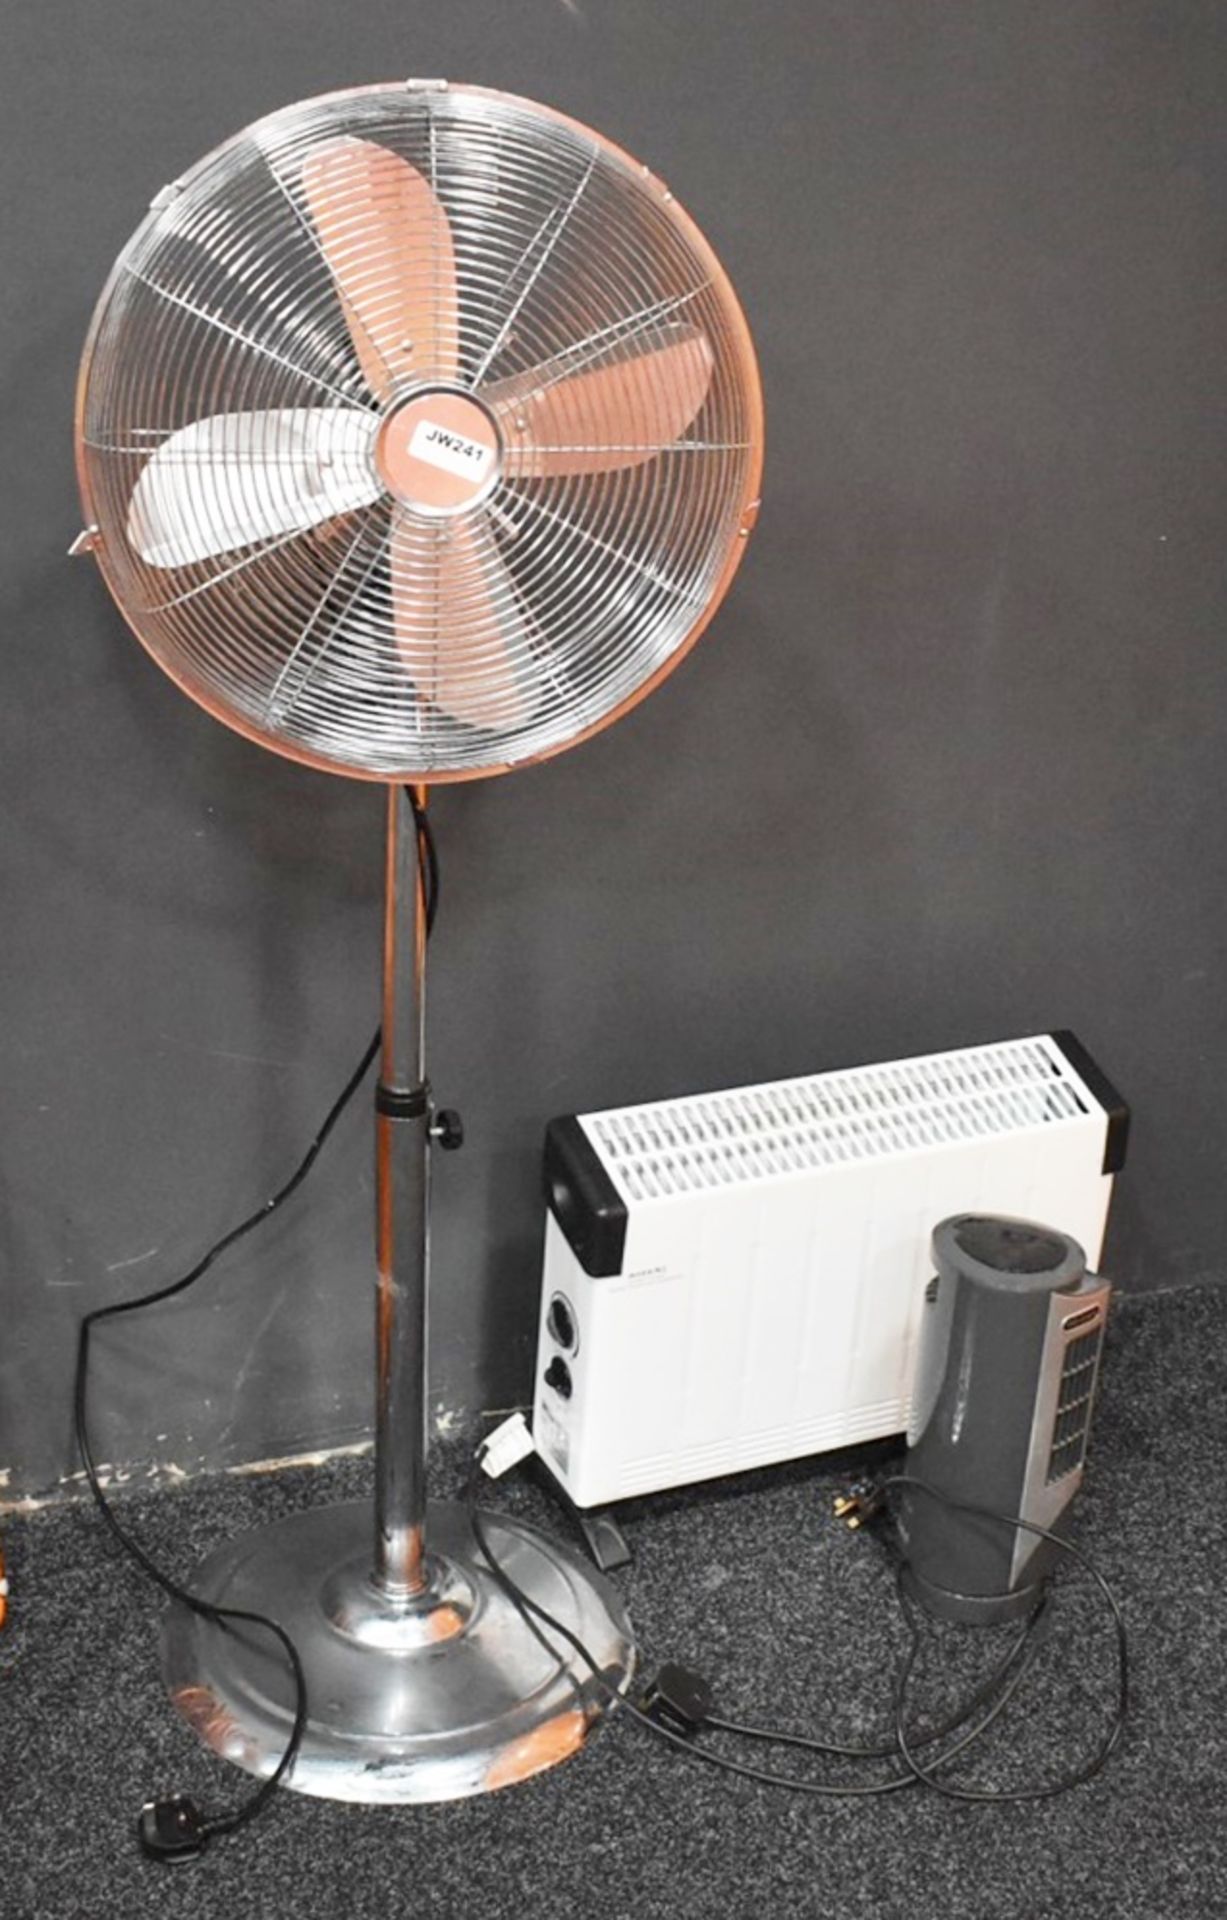 3 x Various Heaters and Fans - Includes Chrome Fan Pedestal, Mini Fan and Heater